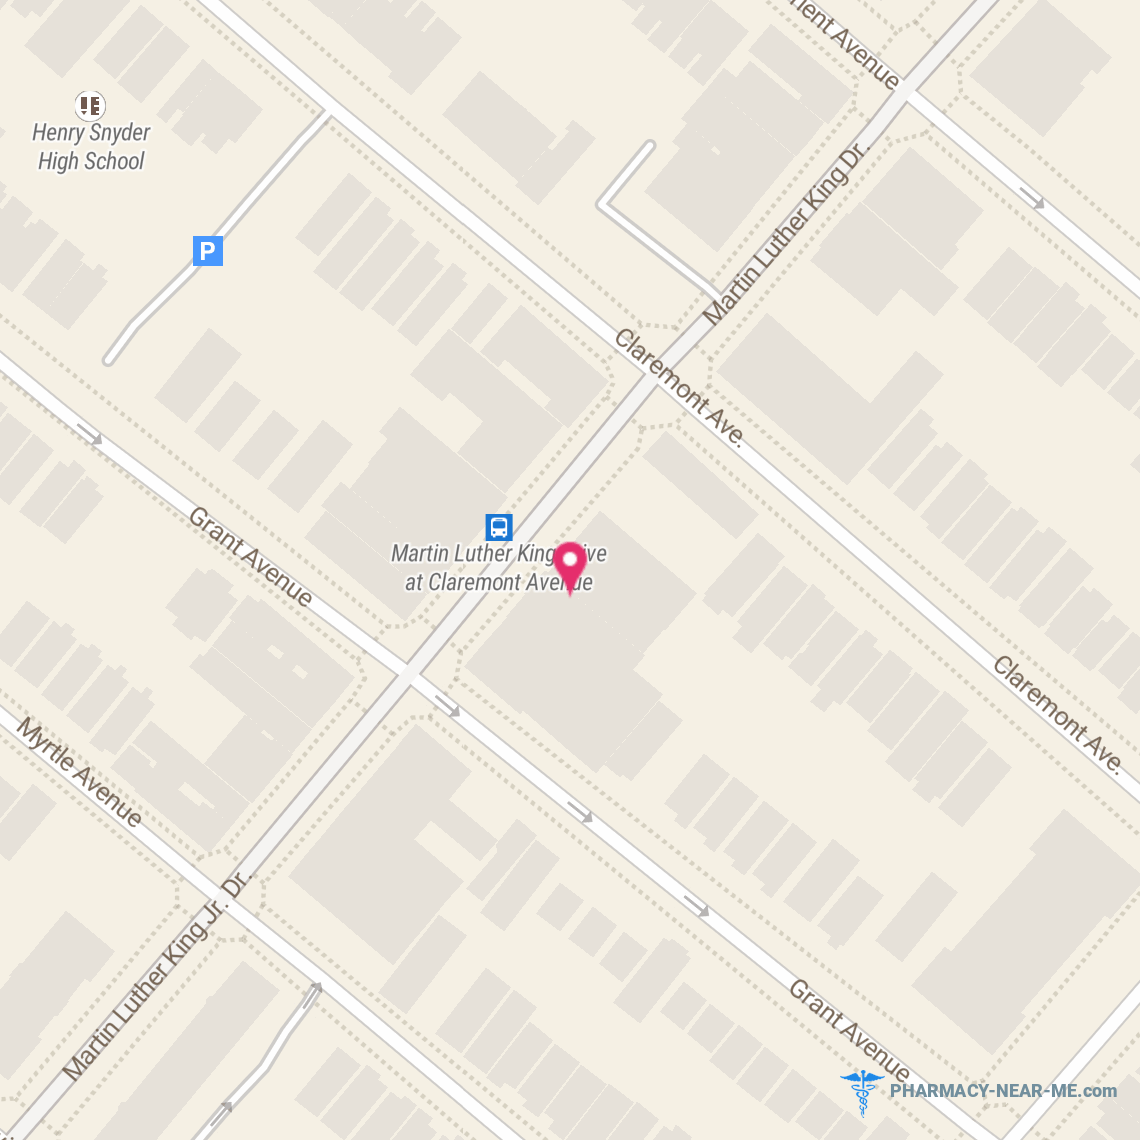 MLK PHARMACY - Pharmacy Hours, Phone, Reviews & Information: 173 Martin Luther King Jr Drive, Jersey City, New Jersey 07305, United States